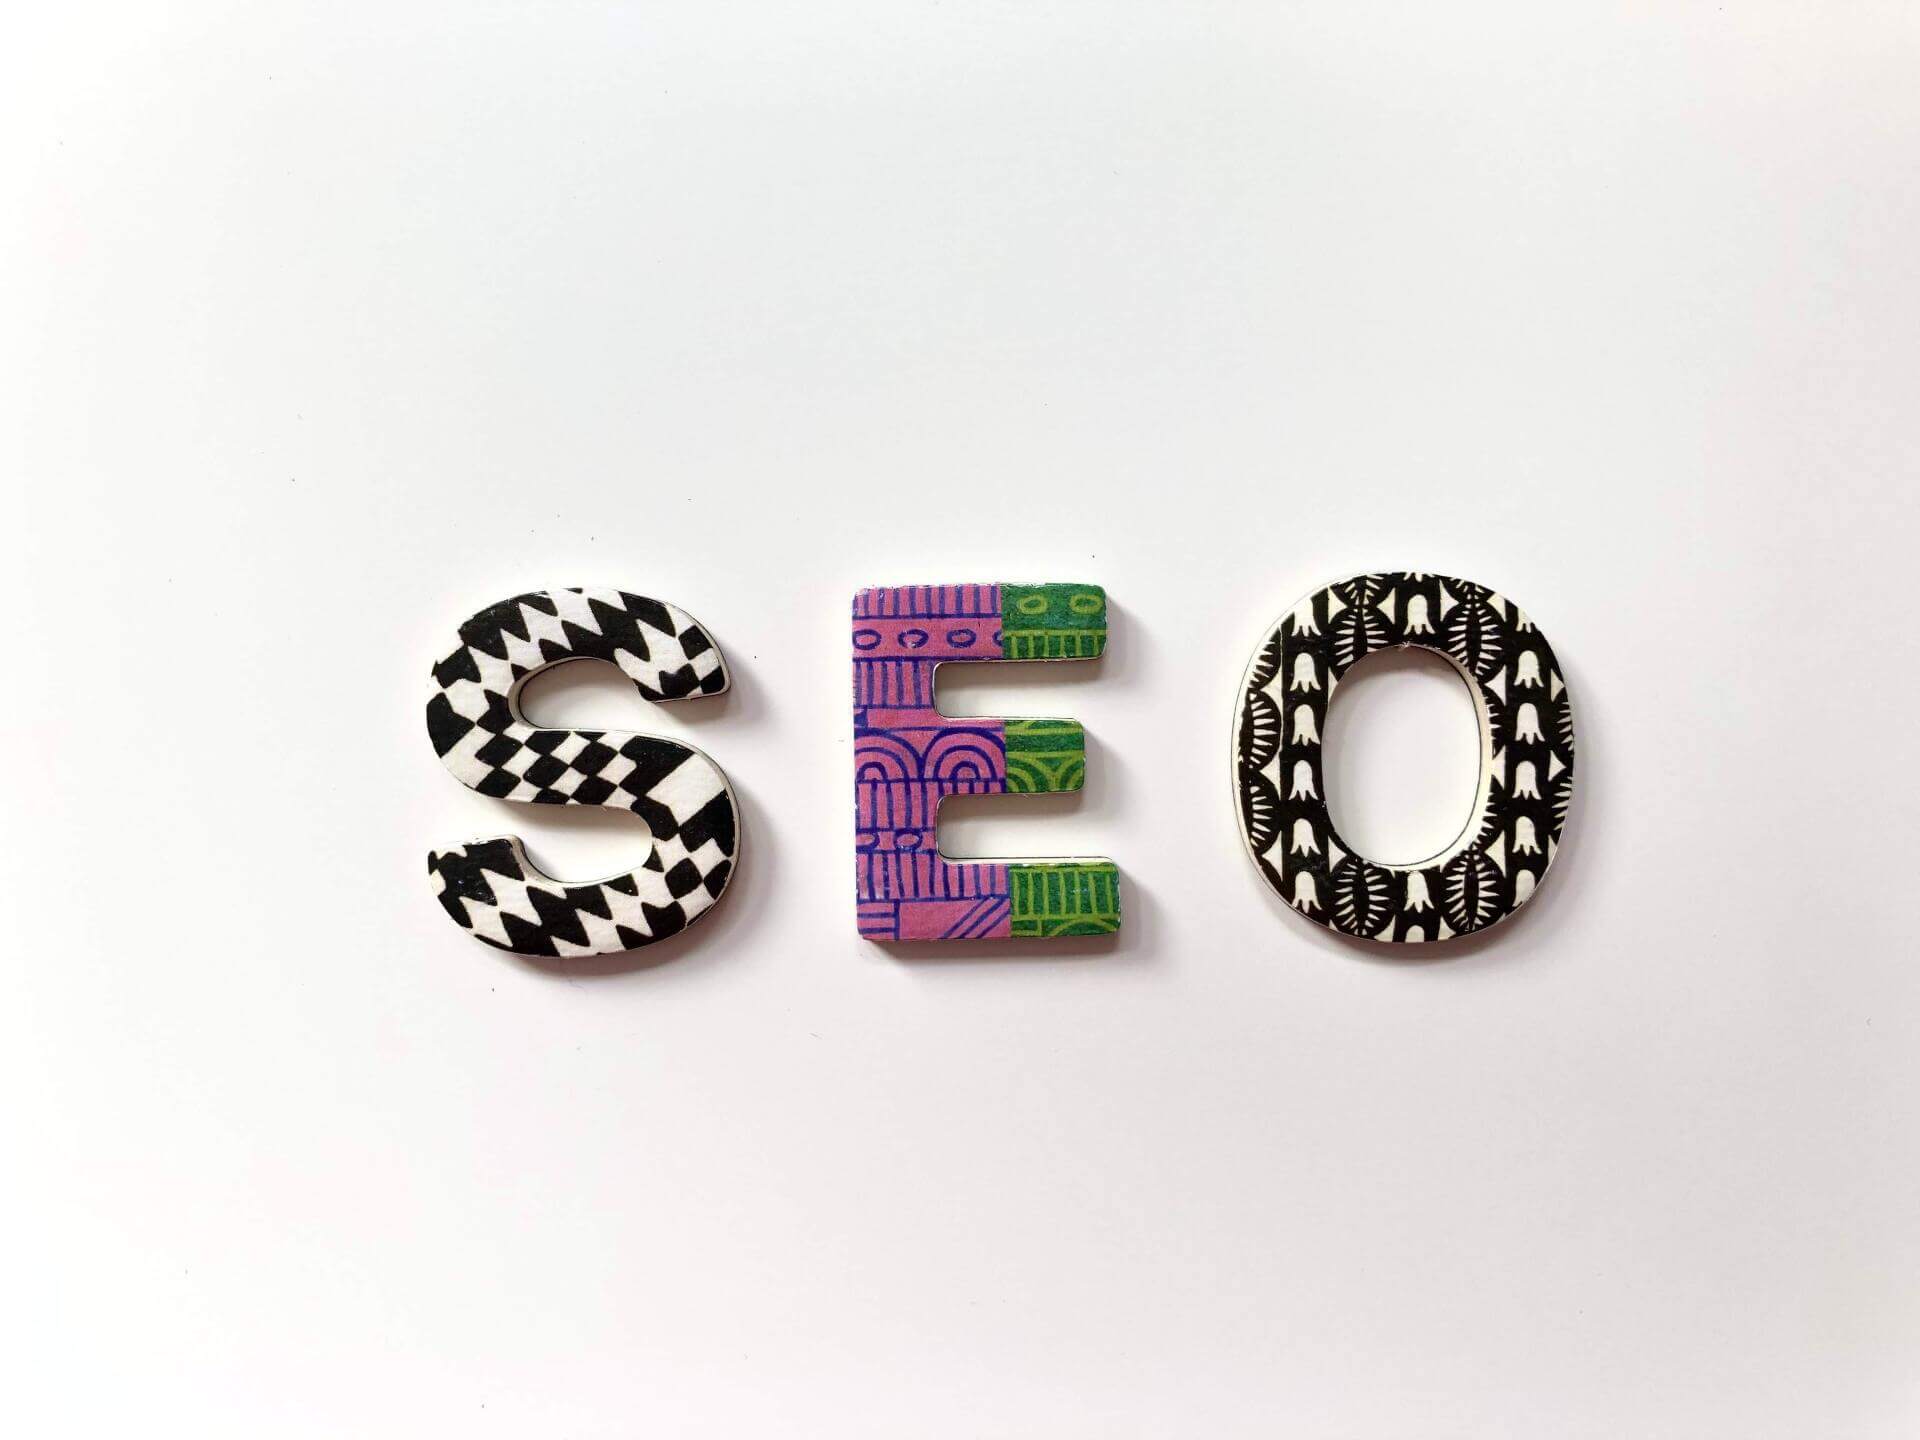 SEO spelt out on a white background